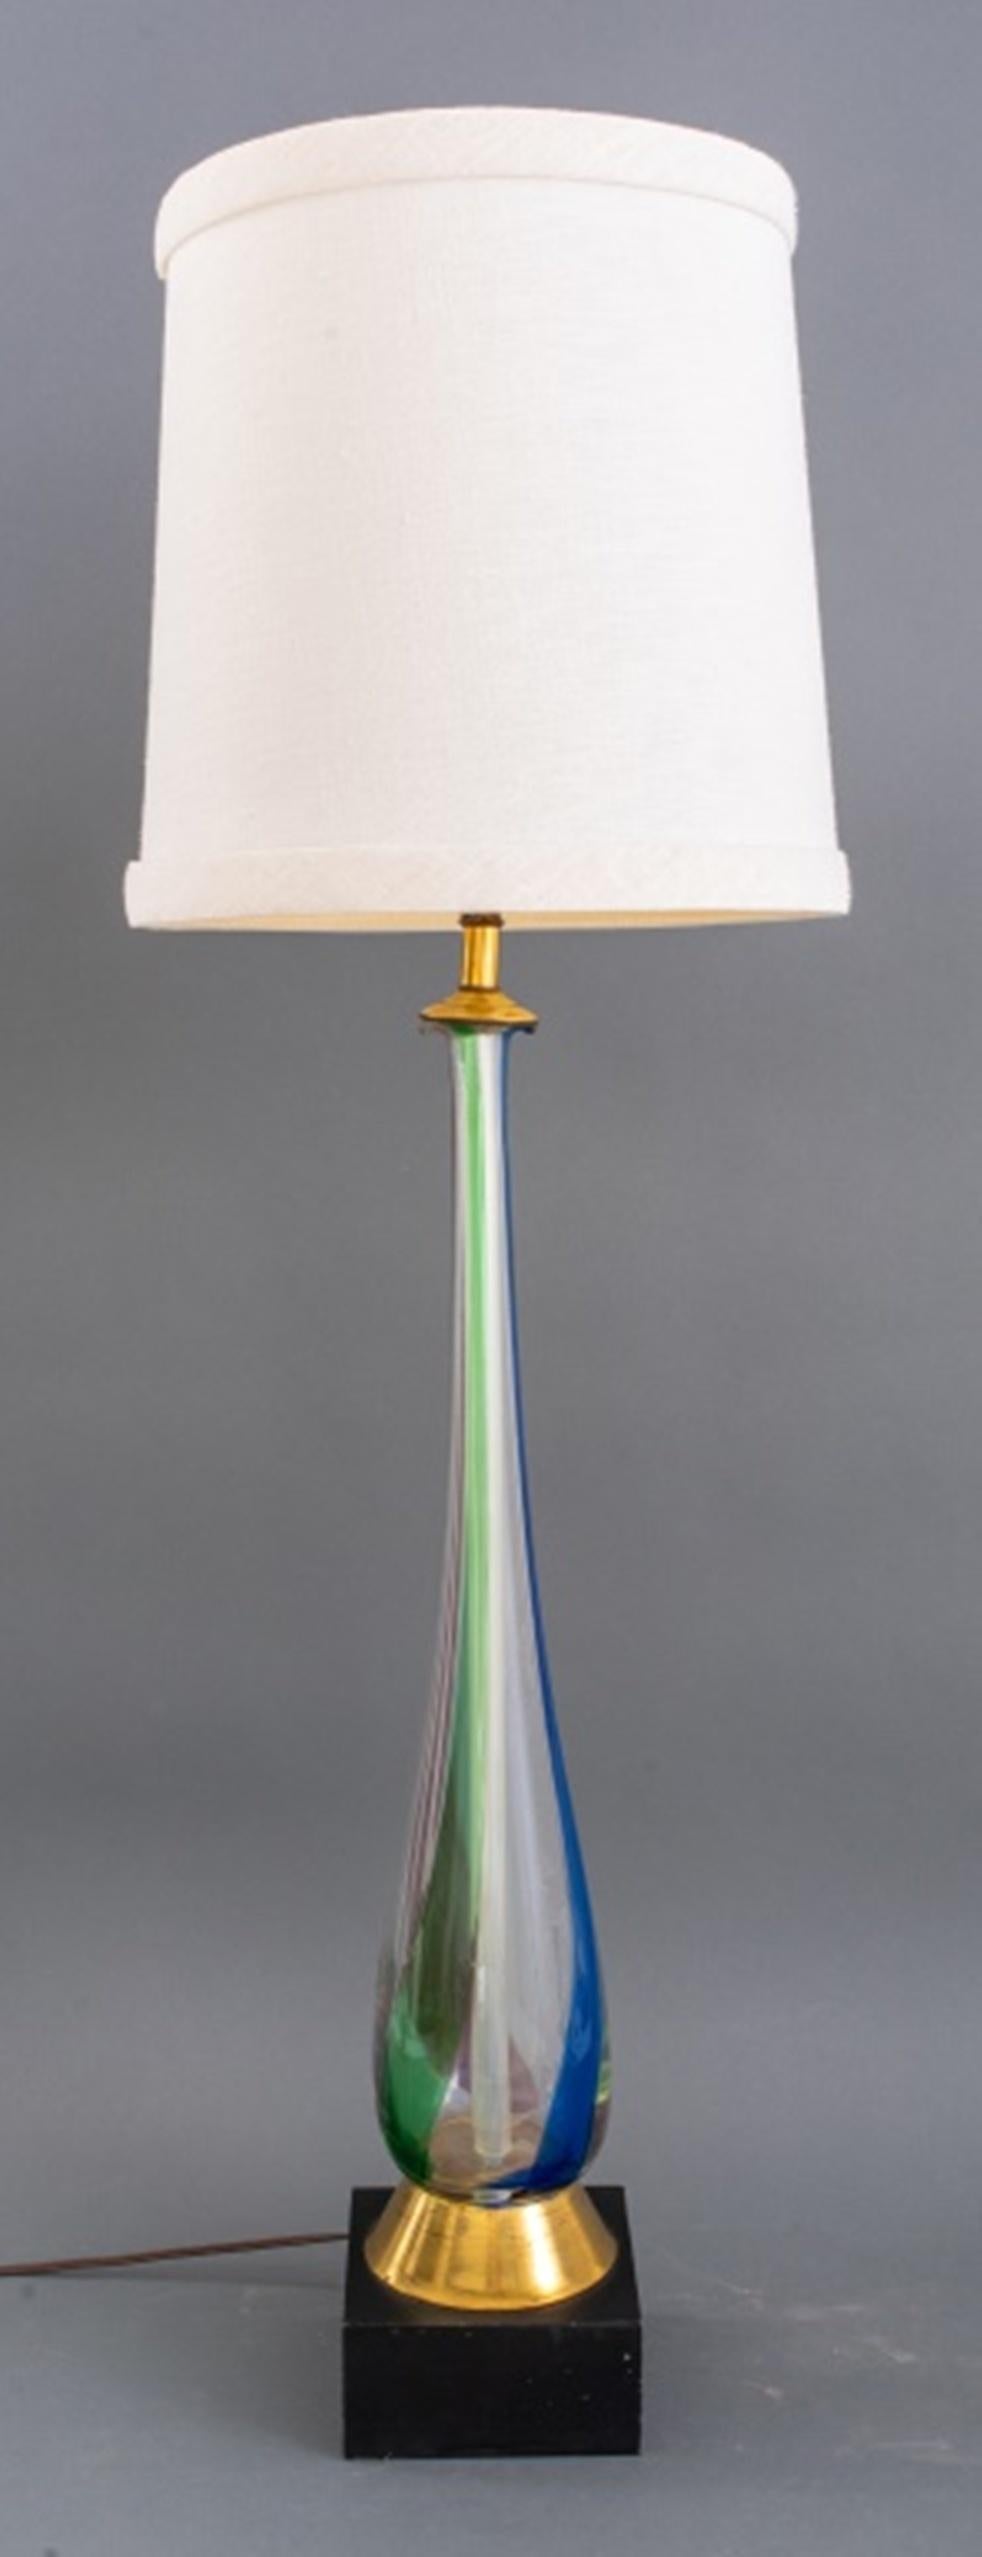 Pair of Seguso for Marbro Italian Mid-Century Modern monumental hand-blown polychrome Murano glass table lamps, raised on metal bases, apparently unmarked.

Dimensions: 45.5